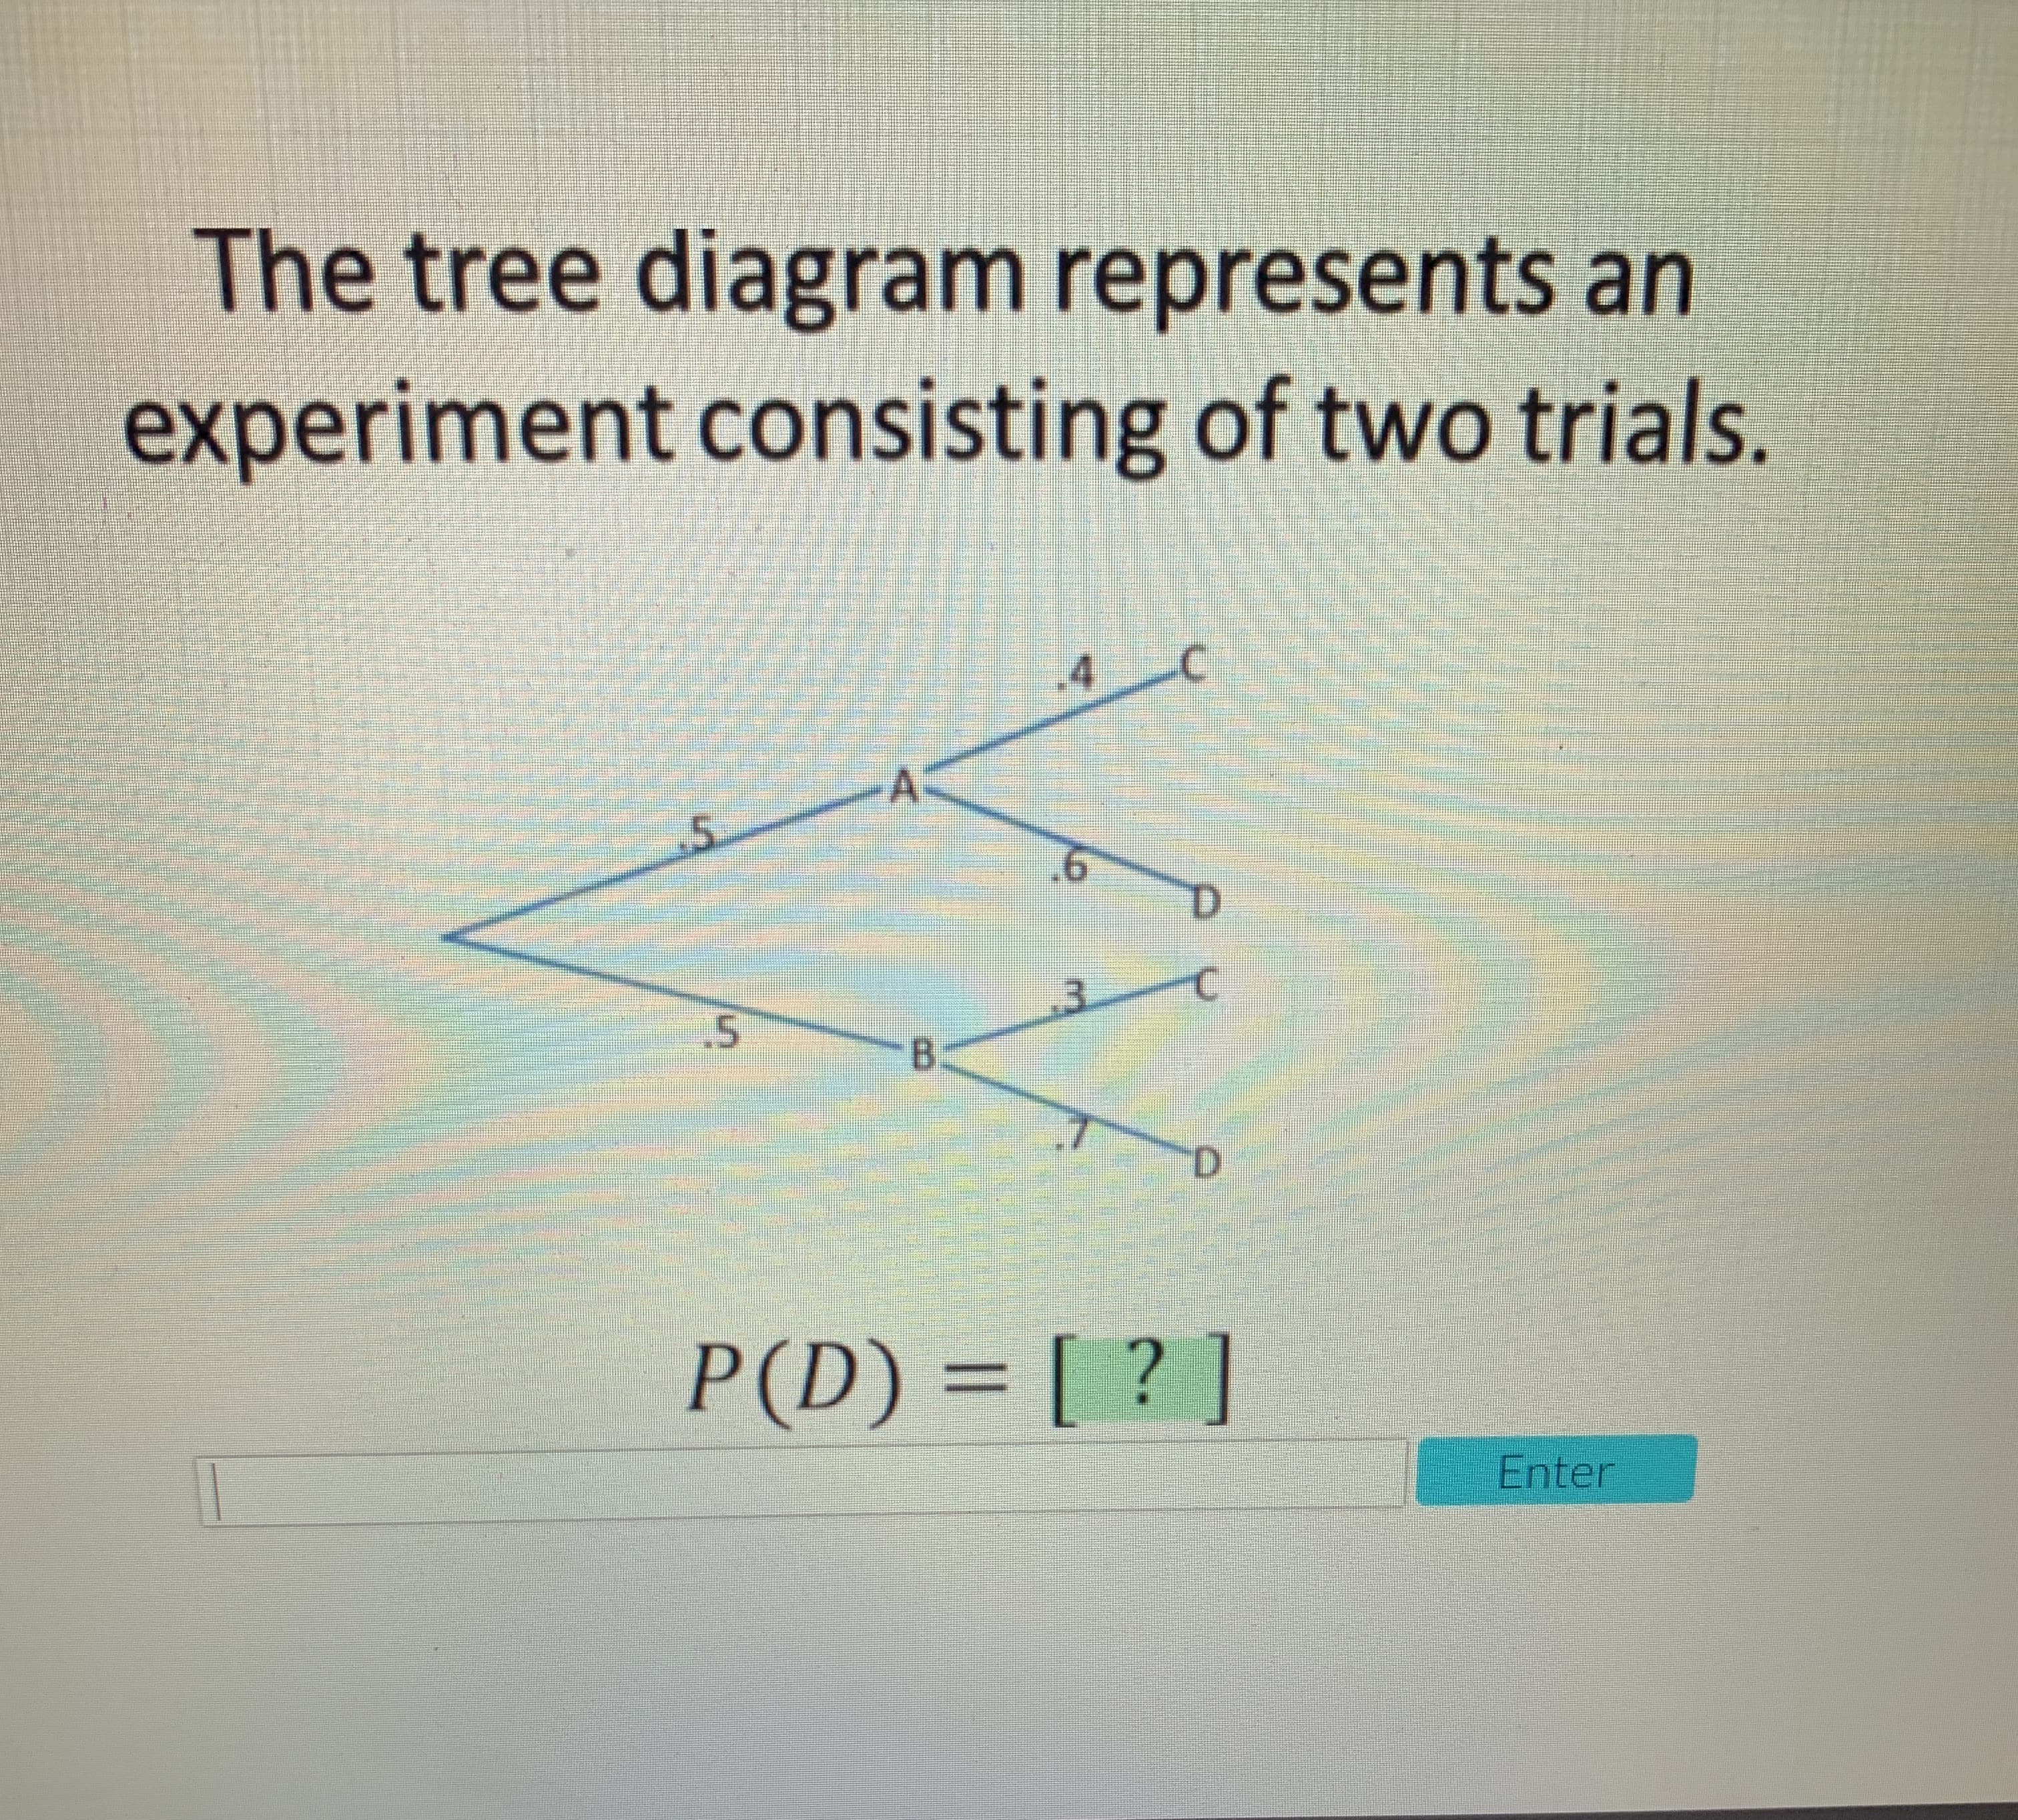 The tree diagram represents an
experiment consisting of two trials.
